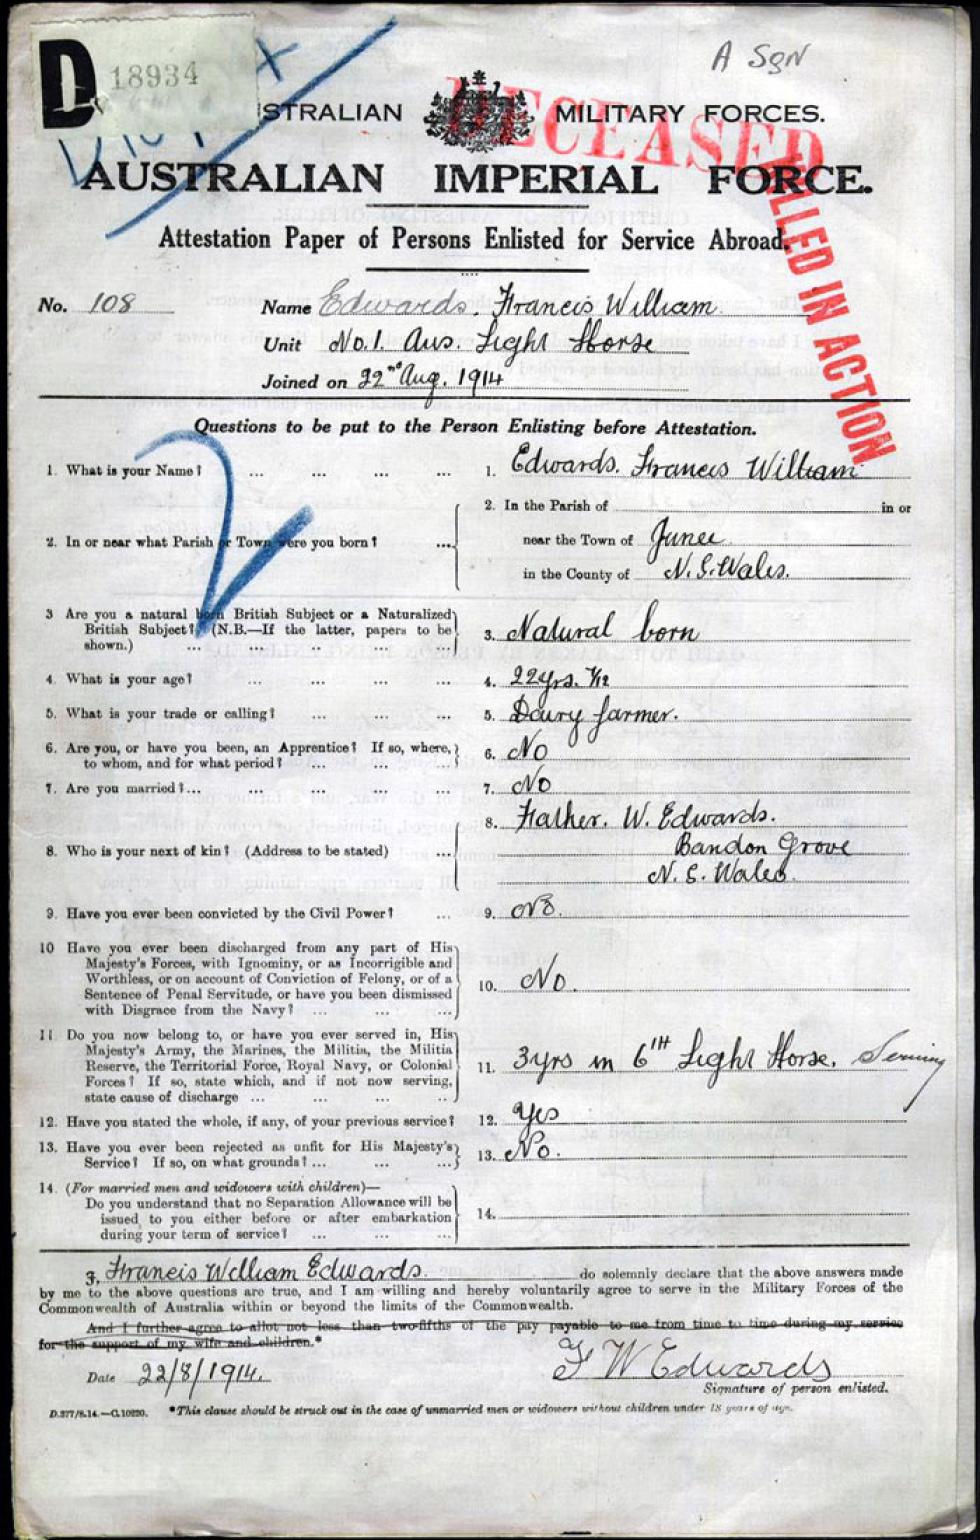 An example of an attestation paper